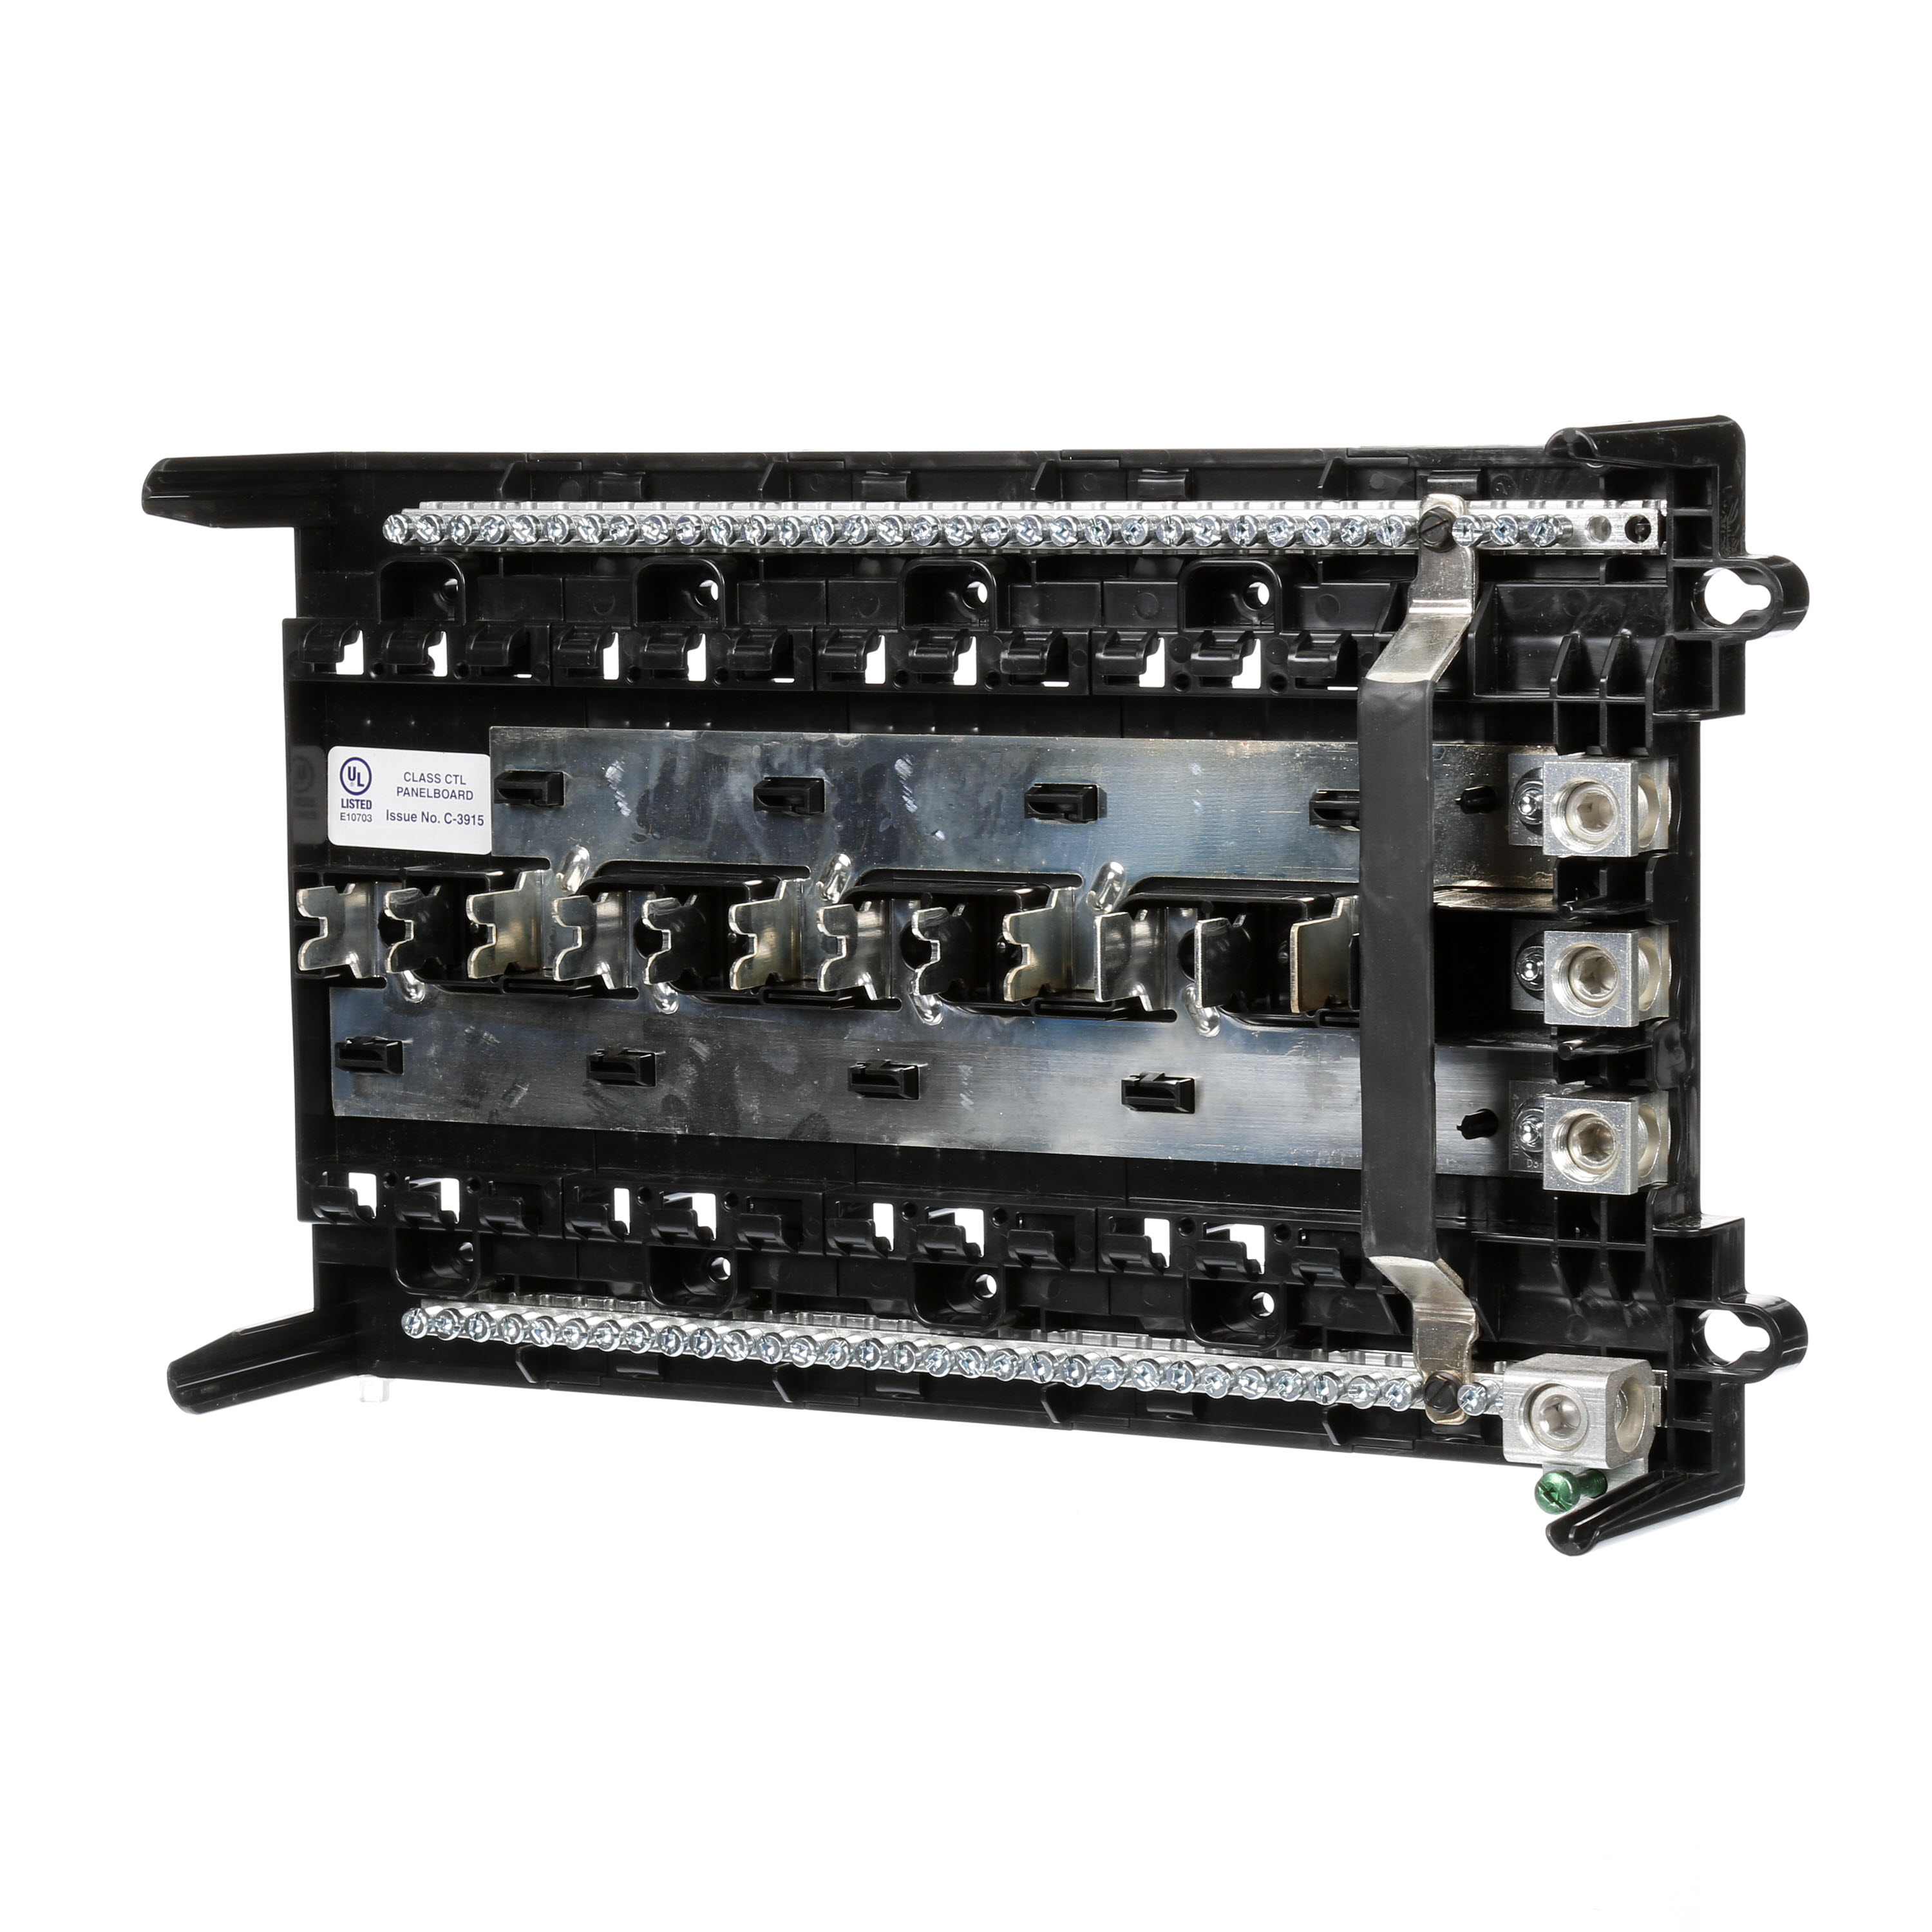 SIEMENS LOW VOLTAGE PL SERIES UNASSEMBLED LOAD CENTER. MAIN LUG INTERIOR WITH 24 1-INCH SPACES ALLOWING MAX 42 CIRCUITS. 3-PHASE 4-WIRE SYSTEM RATED 120/240V OR 120/208V (200A) 100KA INTERRUPT. SPECIAL FEATURES COPPER BUS, INTERCHANGEABLE MAIN.